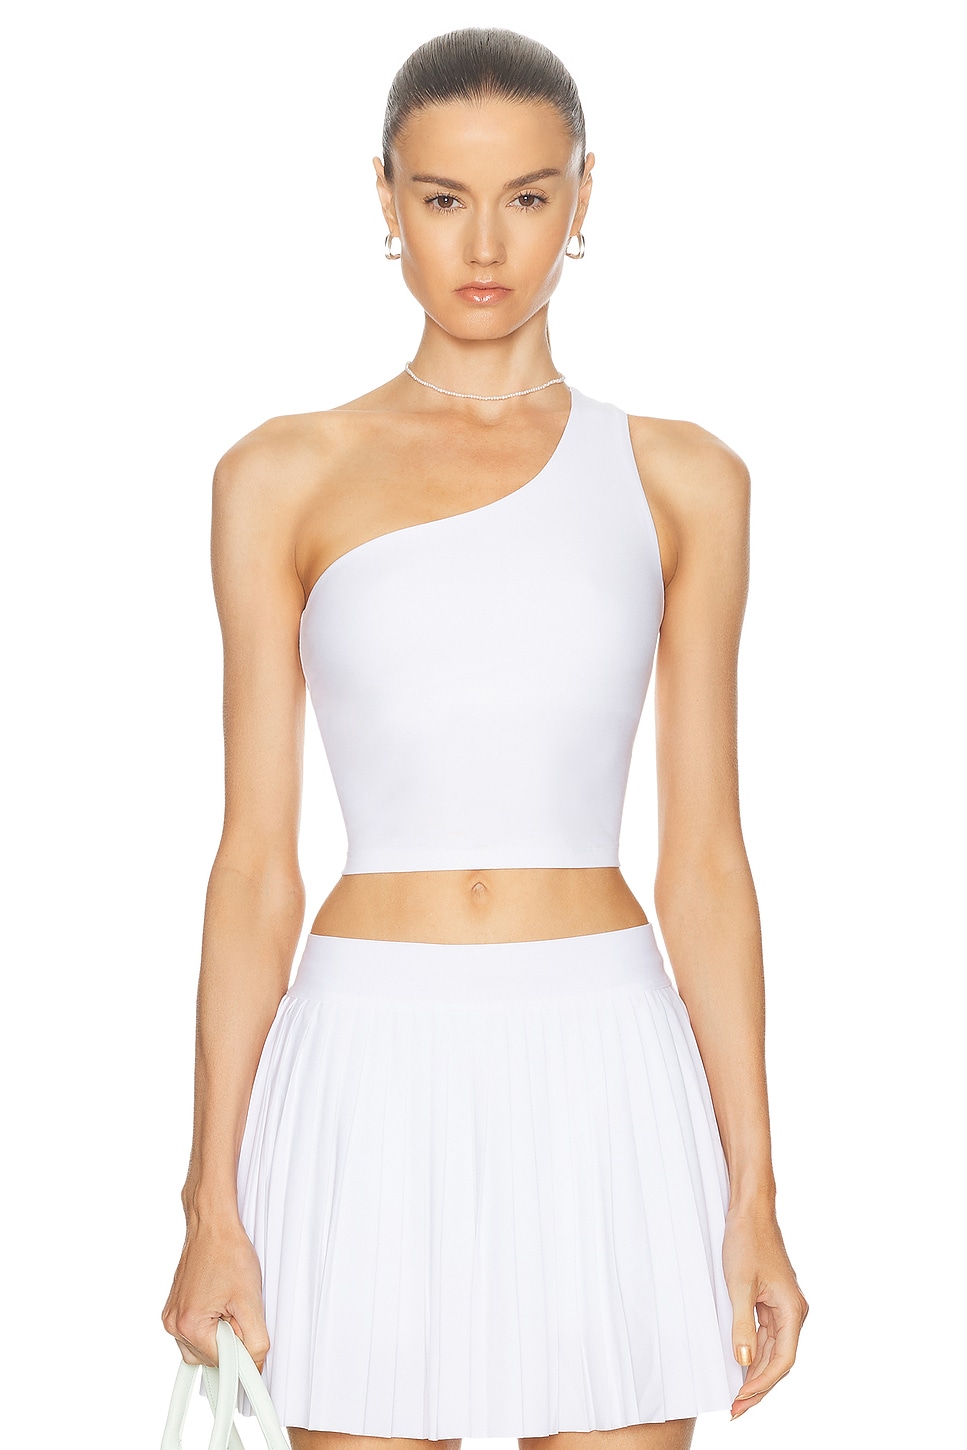 Spacedye The Bold Shoulder Cropped Tank Top in White